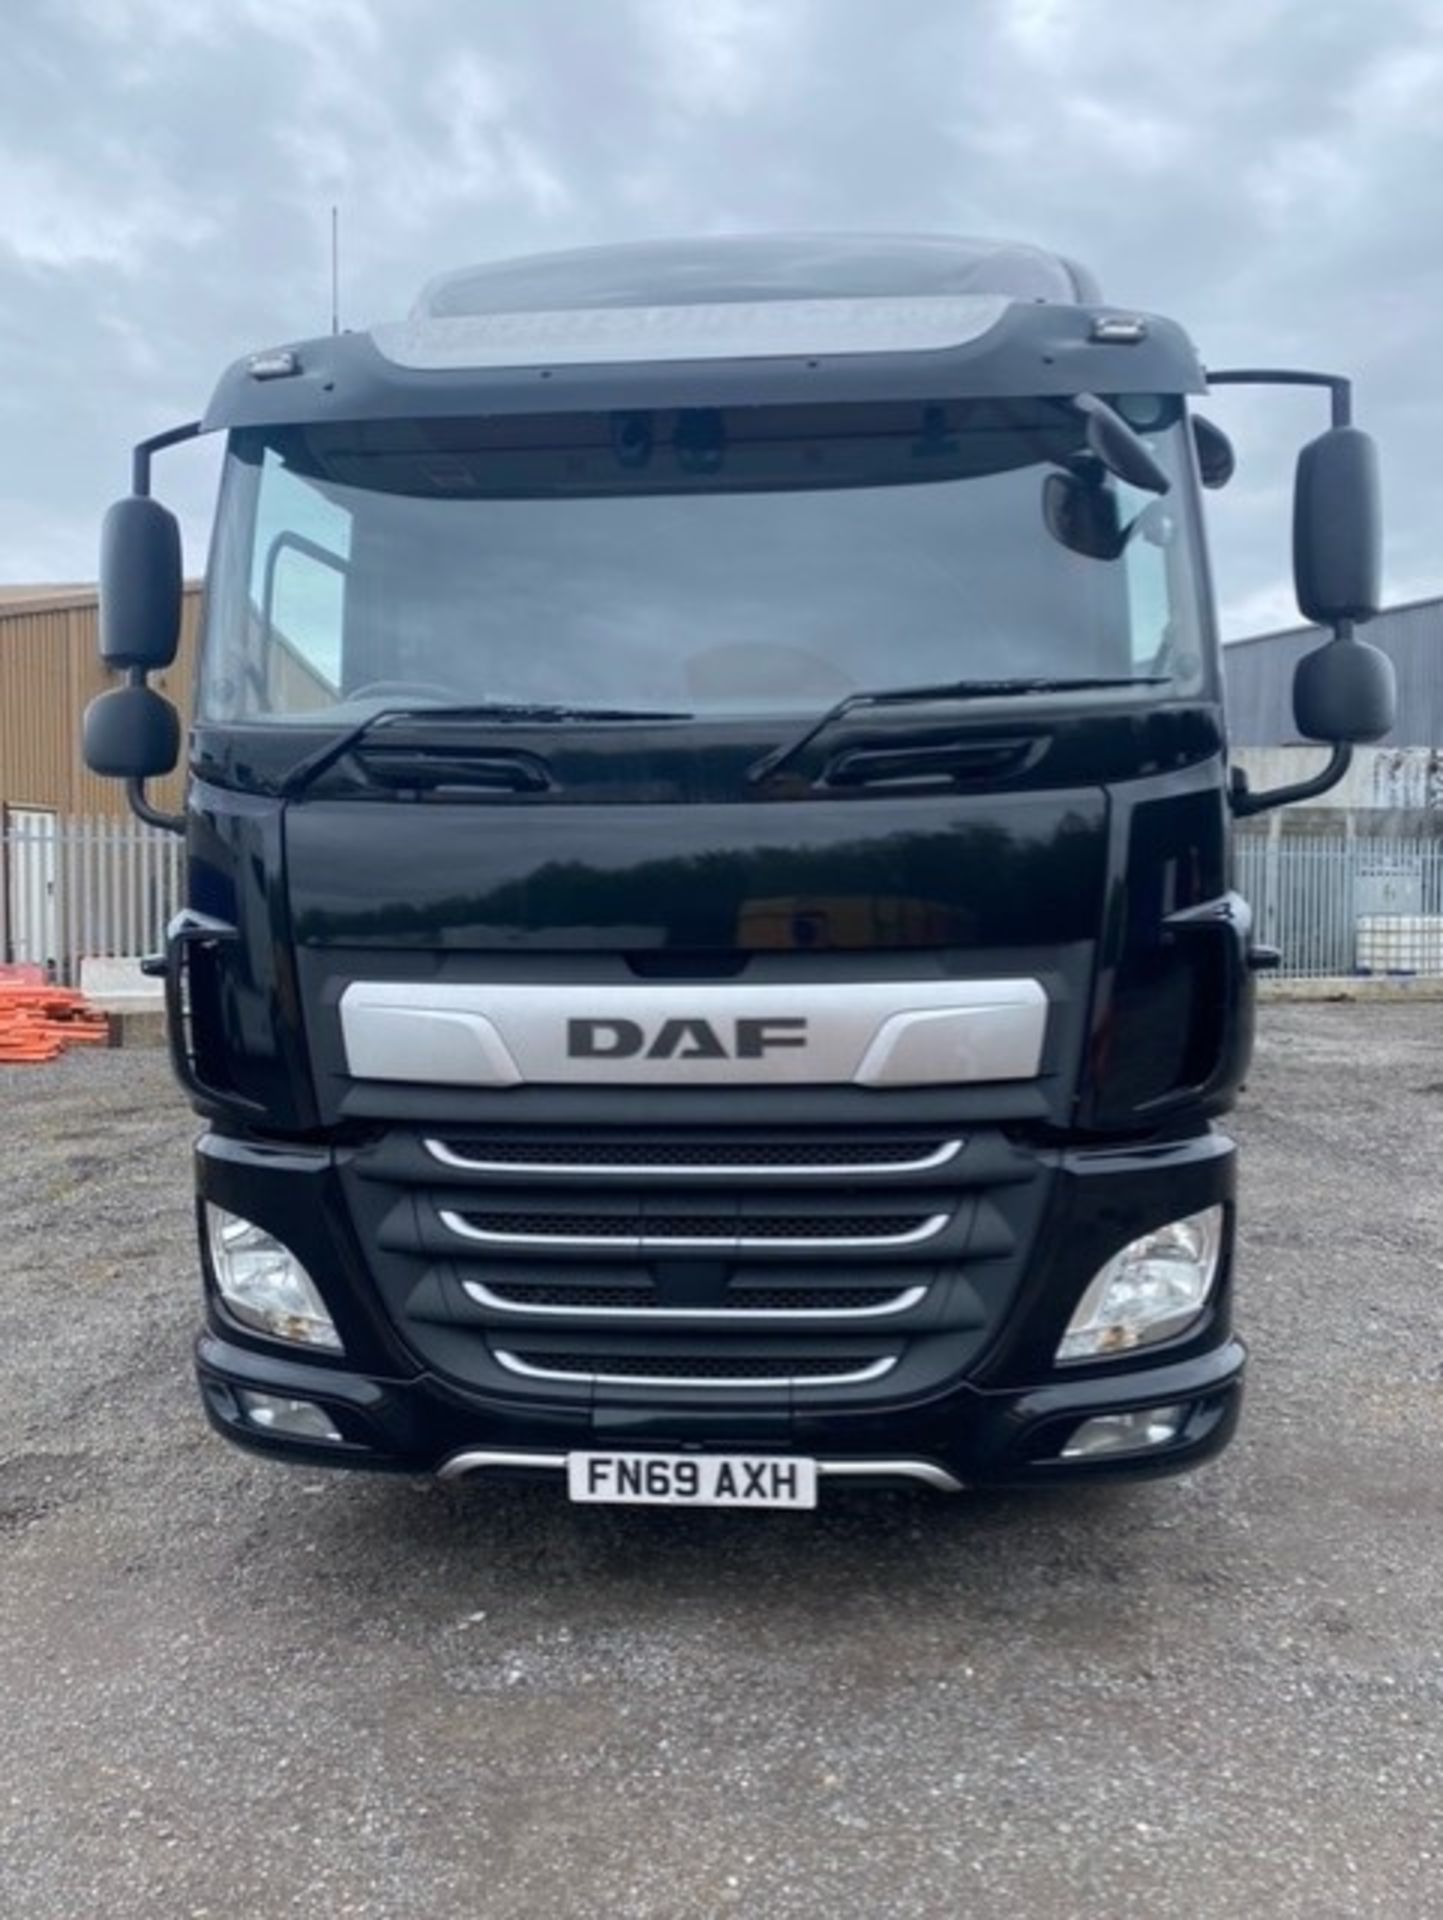 2019, DAF CF 260 FA (Ex-Fleet Owned & Maintained) - FN69 AXH (18 Ton Rigid Truck with Tail Lift) - Image 17 of 22